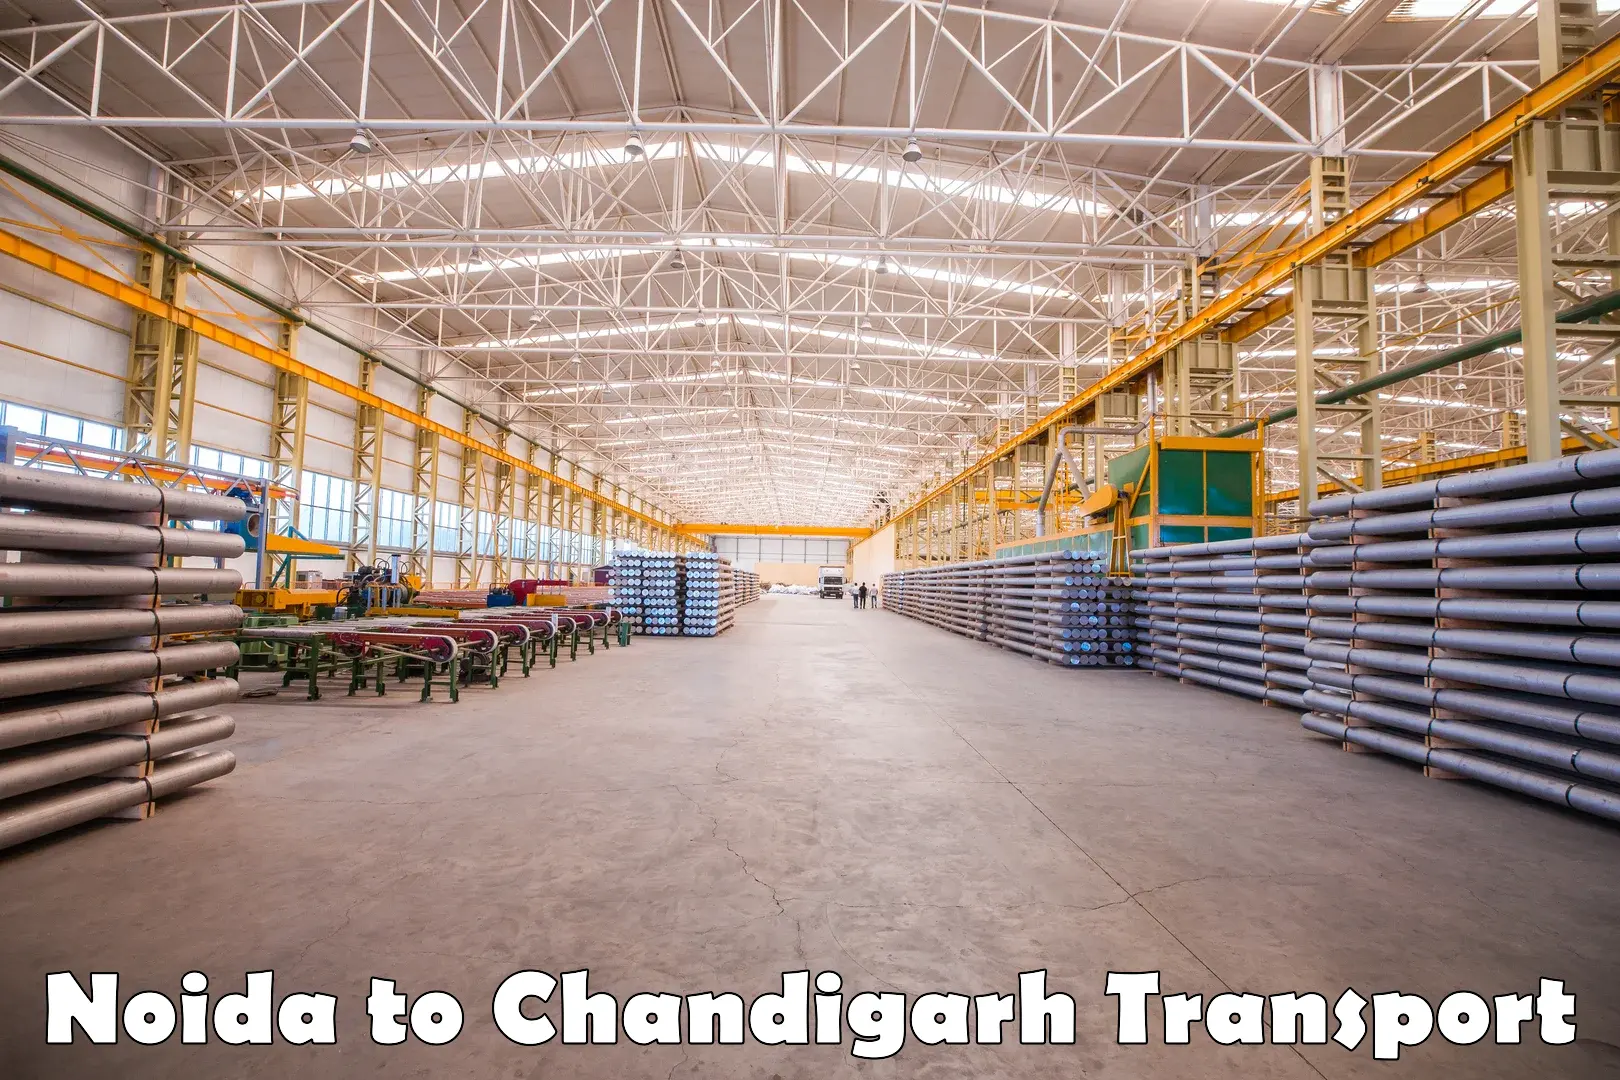 Transport bike from one state to another Noida to Chandigarh